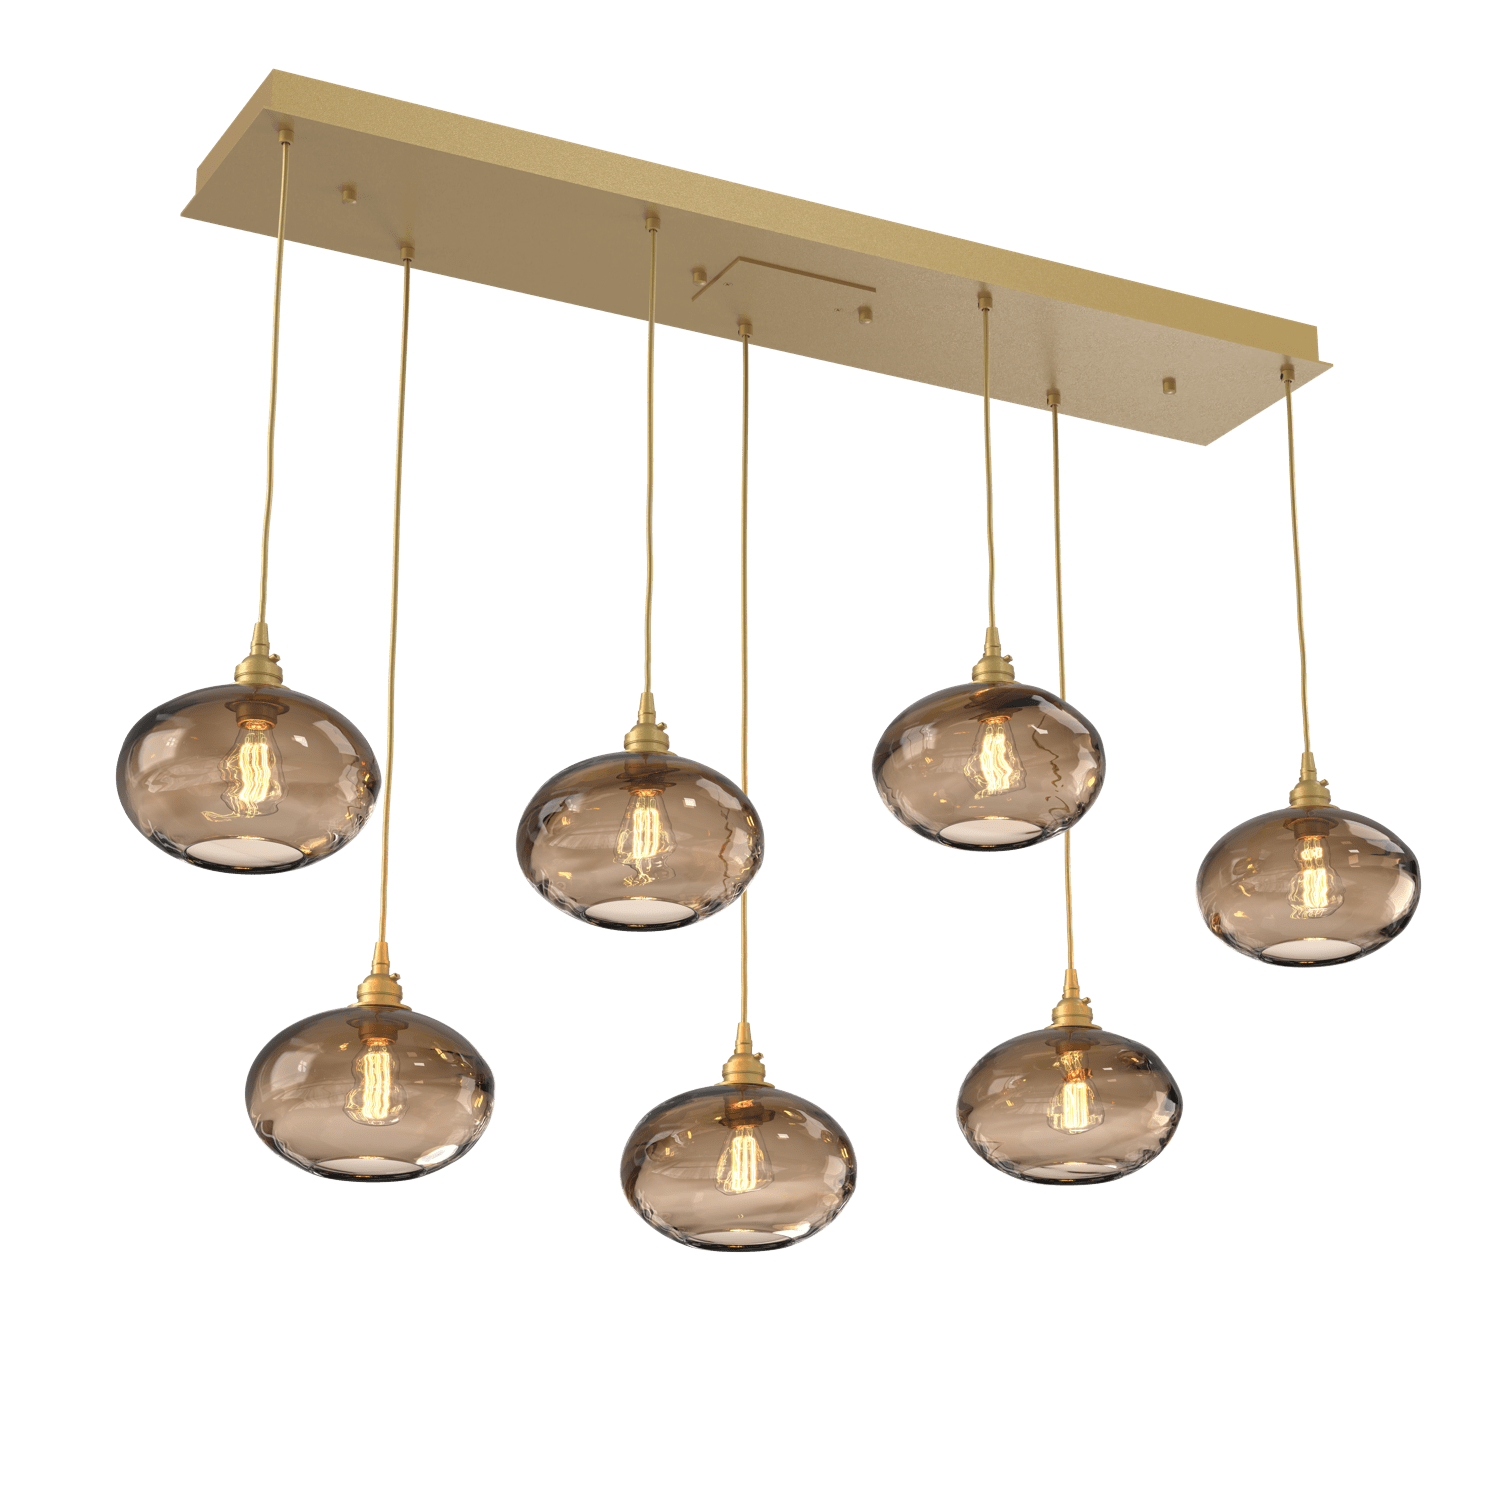 PLB0036-07-GB-OB-Hammerton-Studio-Optic-Blown-Glass-Coppa-7-light-linear-pendant-chandelier-with-gilded-brass-finish-and-optic-bronze-blown-glass-shades-and-incandescent-lamping